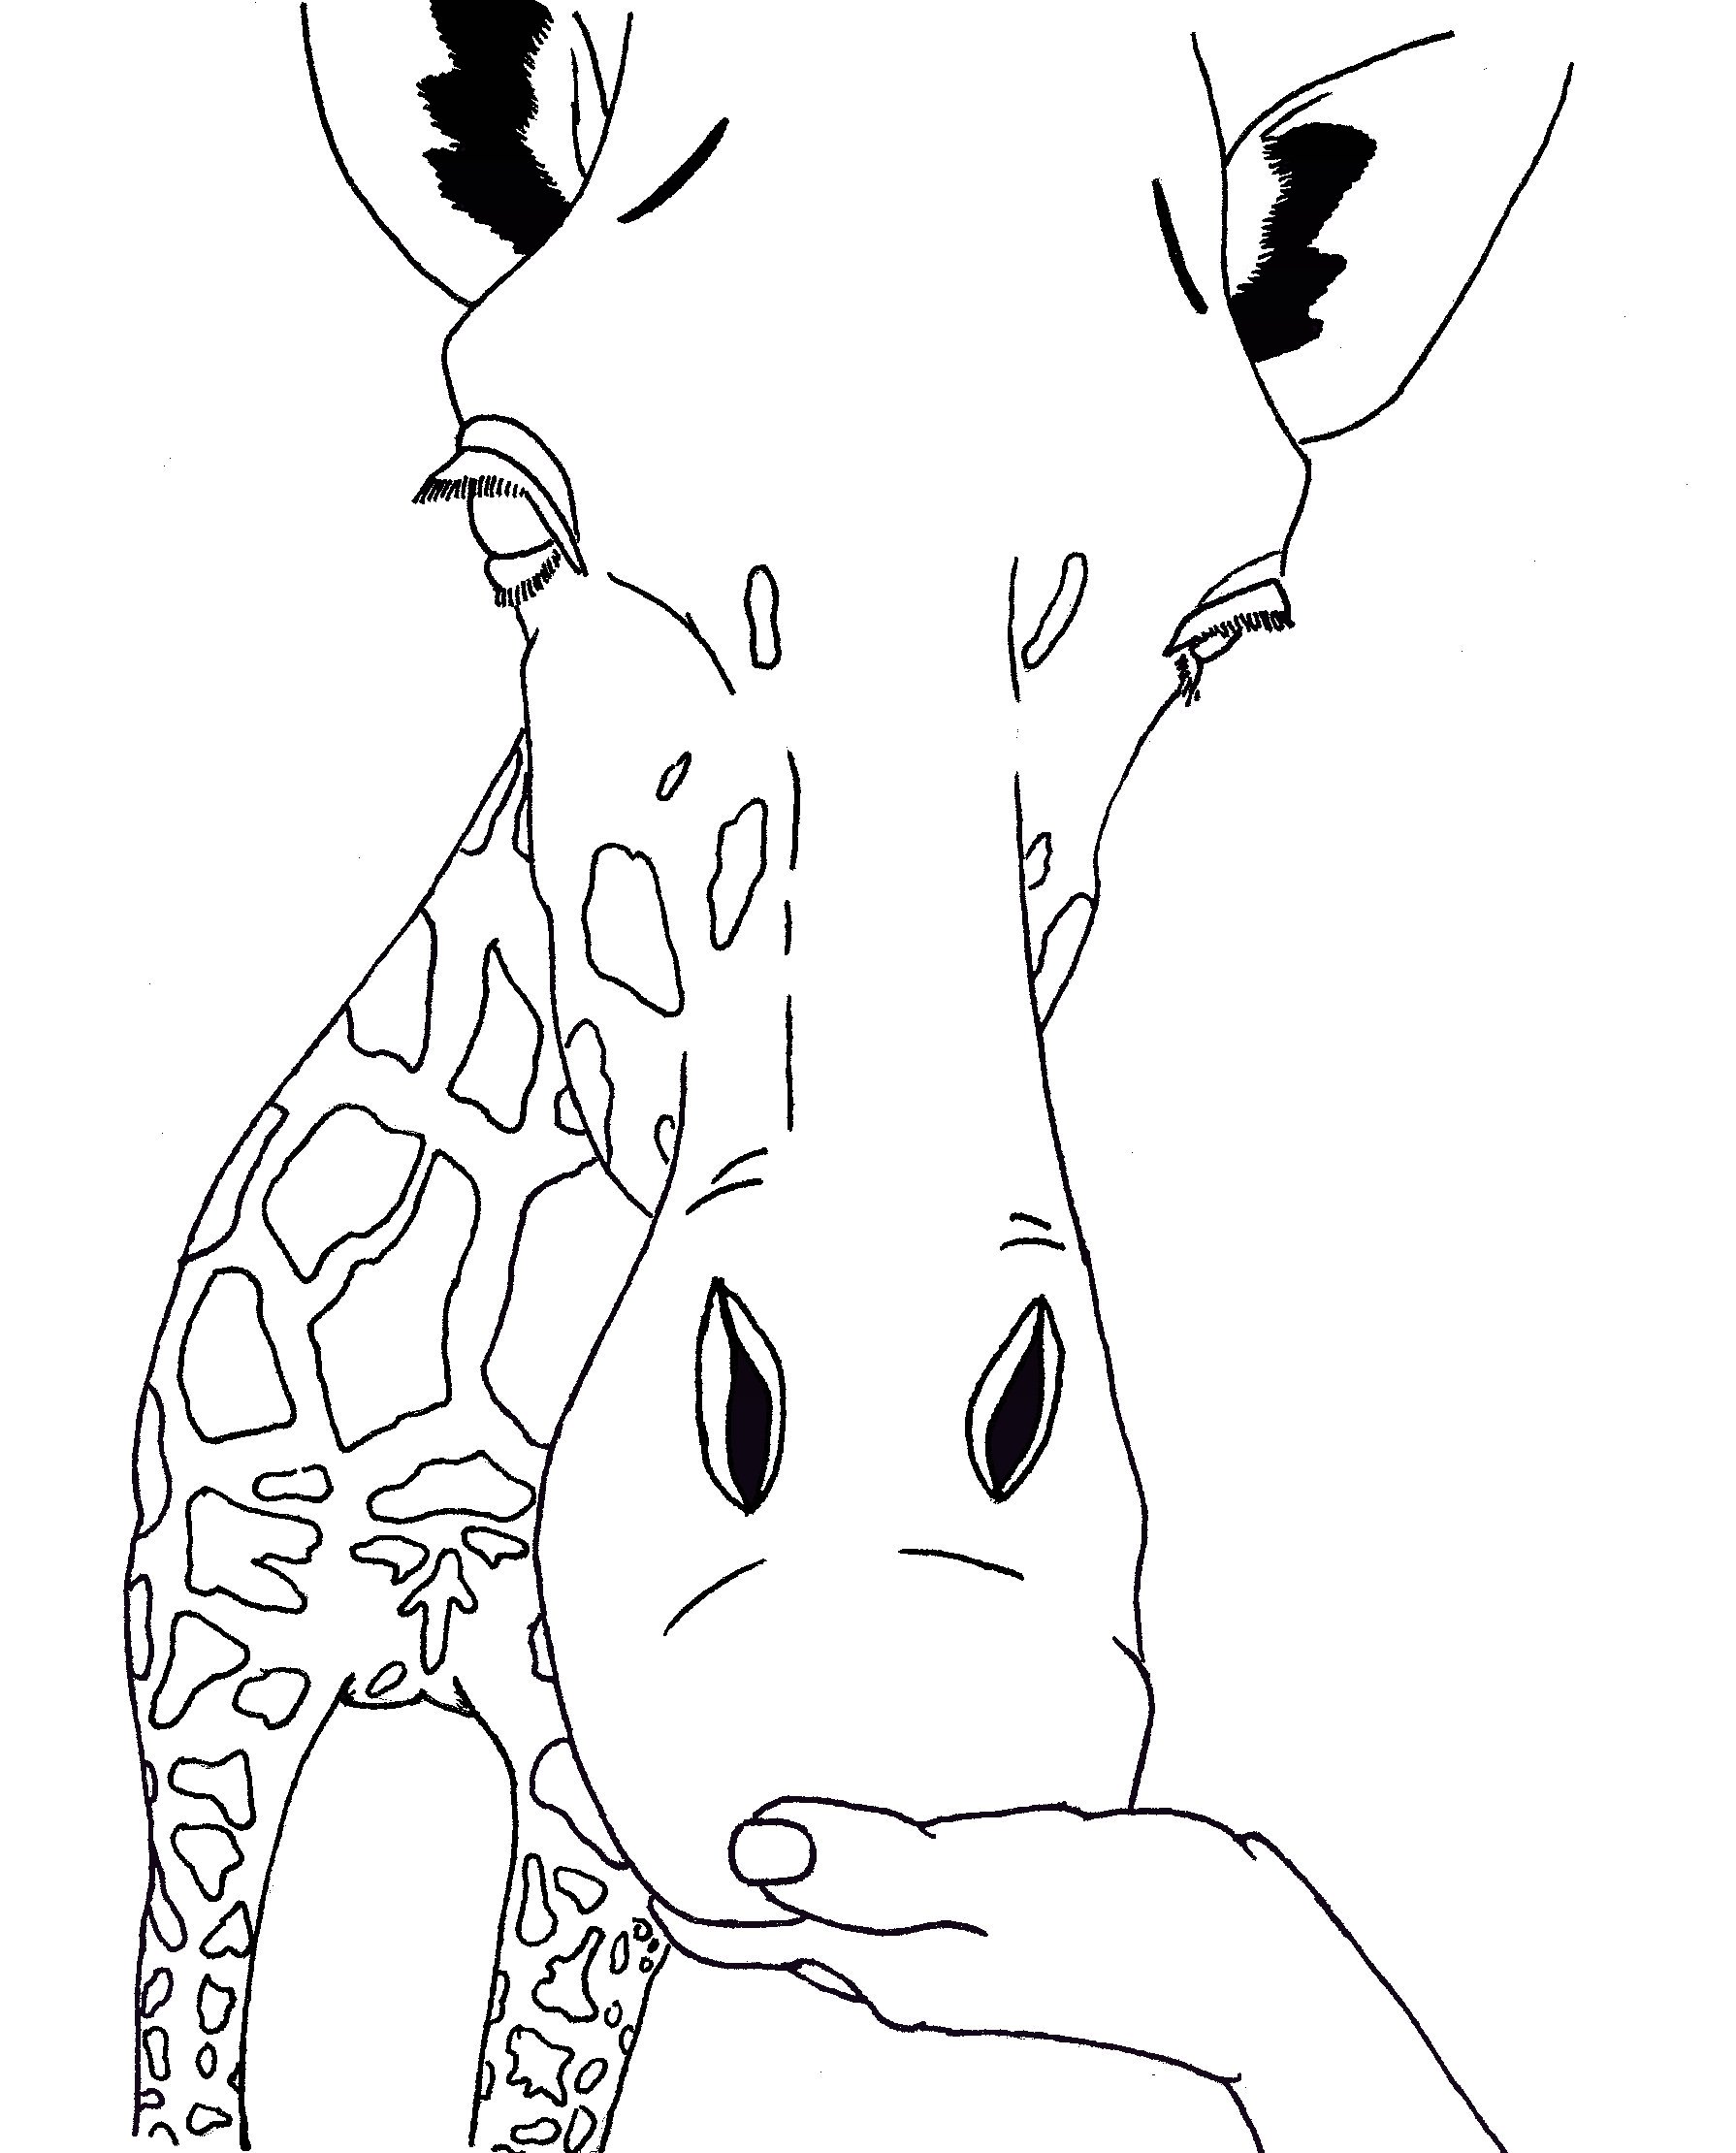 Giraffe Mask Coloring Page - G is for Giraffe coloring page - coloring